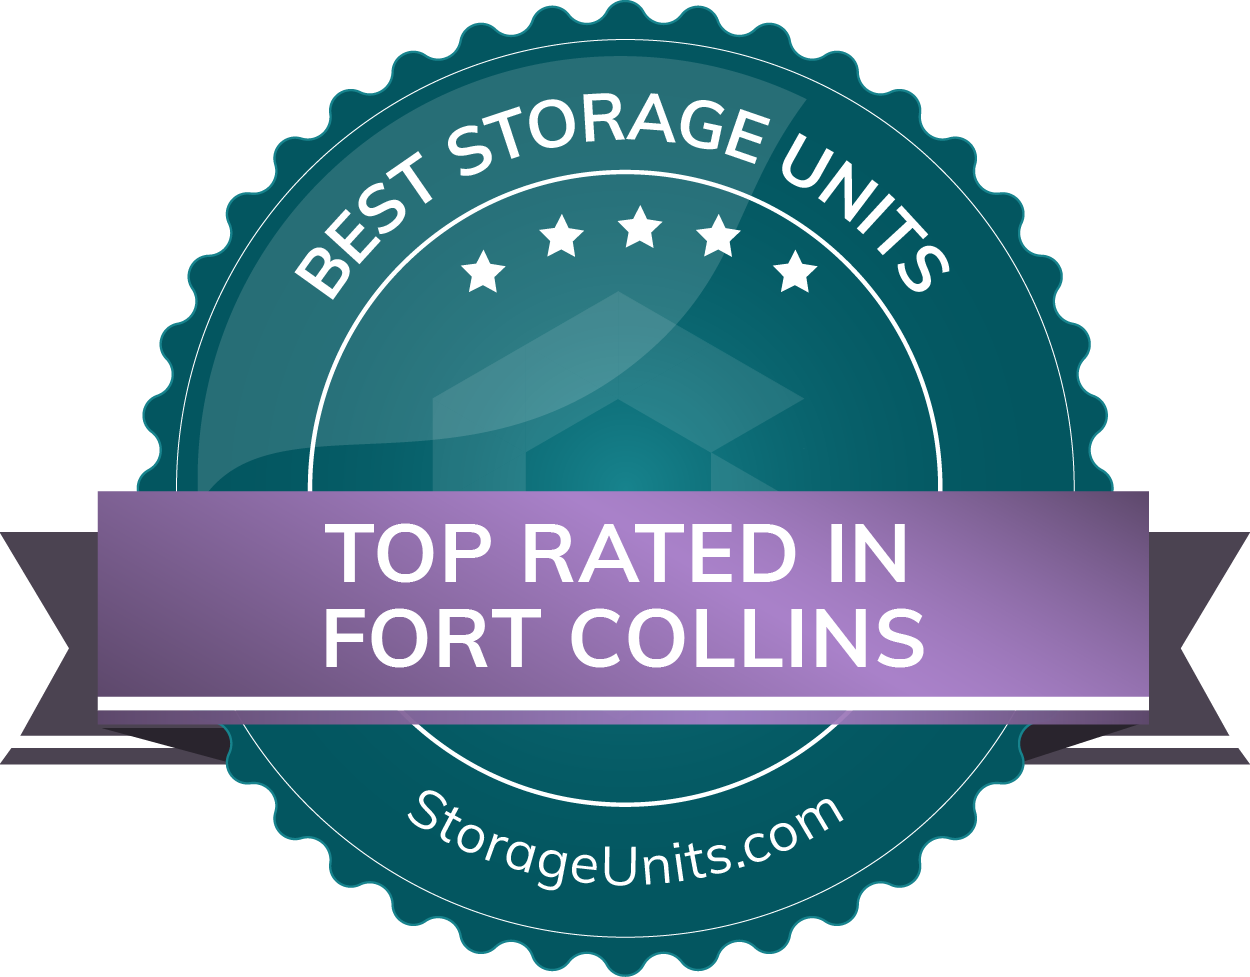 Best Self Storage Units in Fort Collins, Colorado of 2022